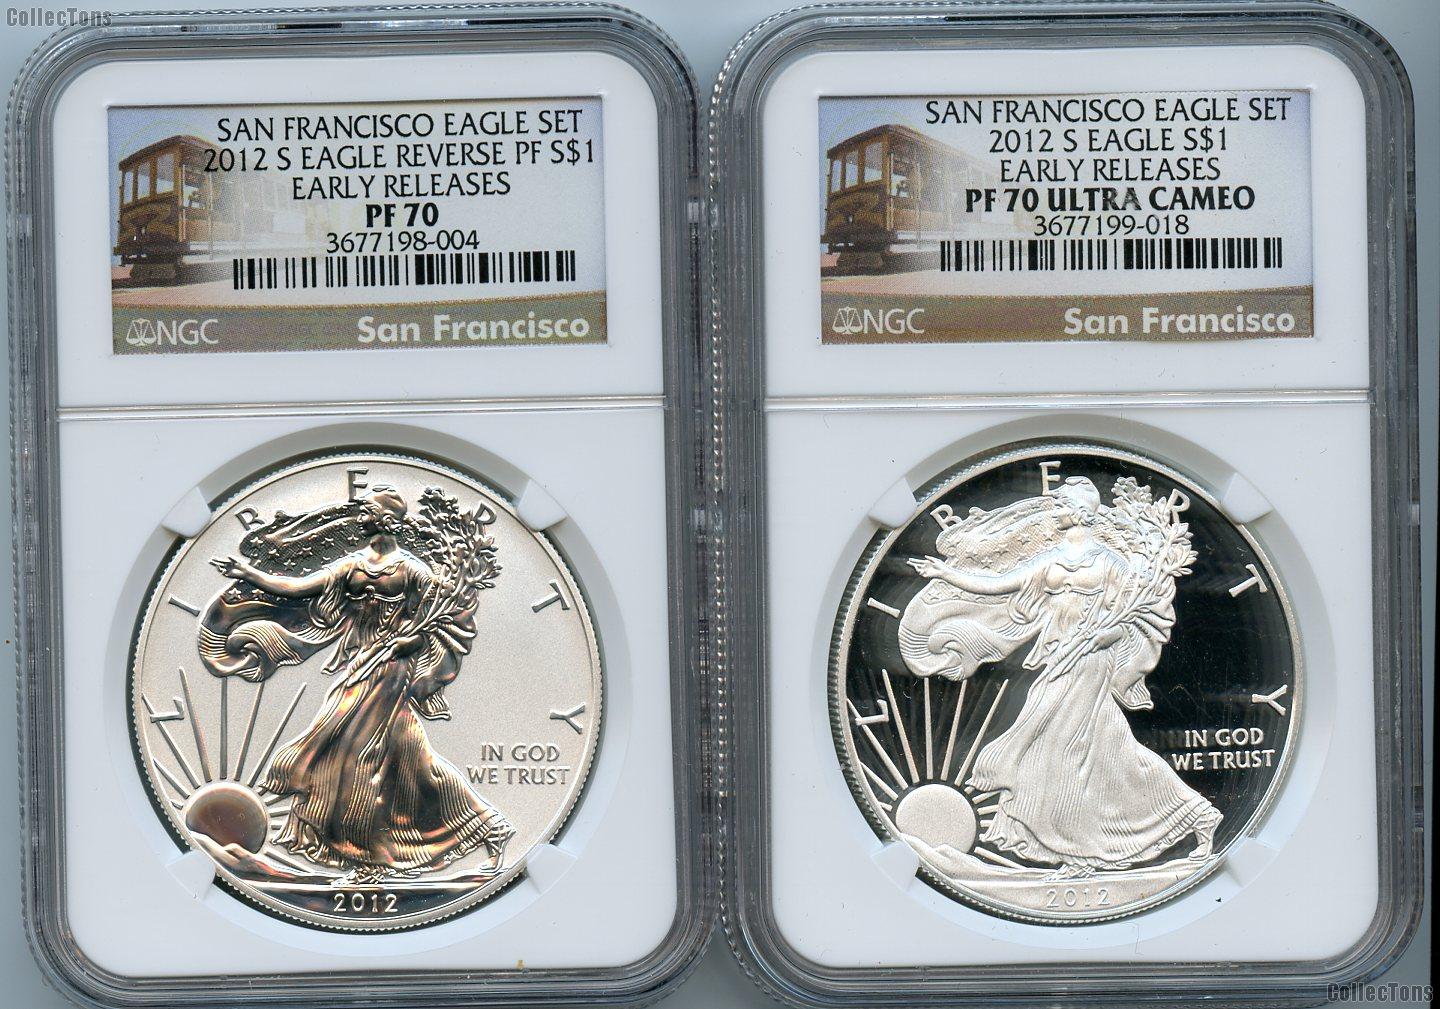 2012-S American Silver Eagle San Francisco 75th Anniversary Set (2 Coins) Proof and Reverse Proof Early Releases in NGC PF 70 ULTRA CAMEO & PF 70